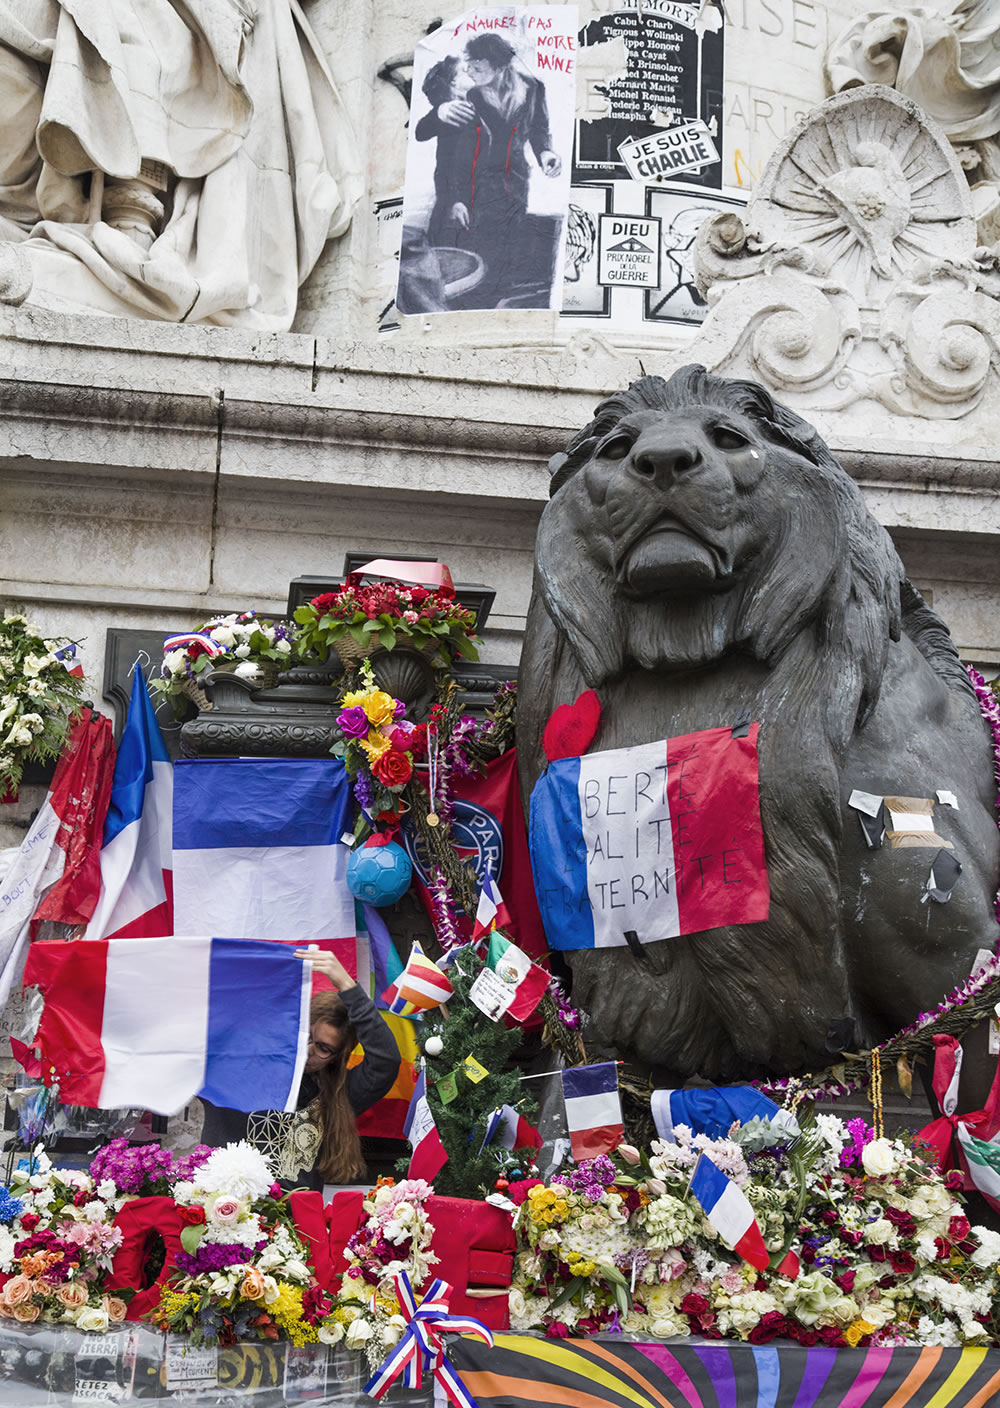 A young woman inspects a French flag on the collective memorial in the center of Place de la République, Paris.  The memorial was damaged on Sunday during conflict between police and protesters.